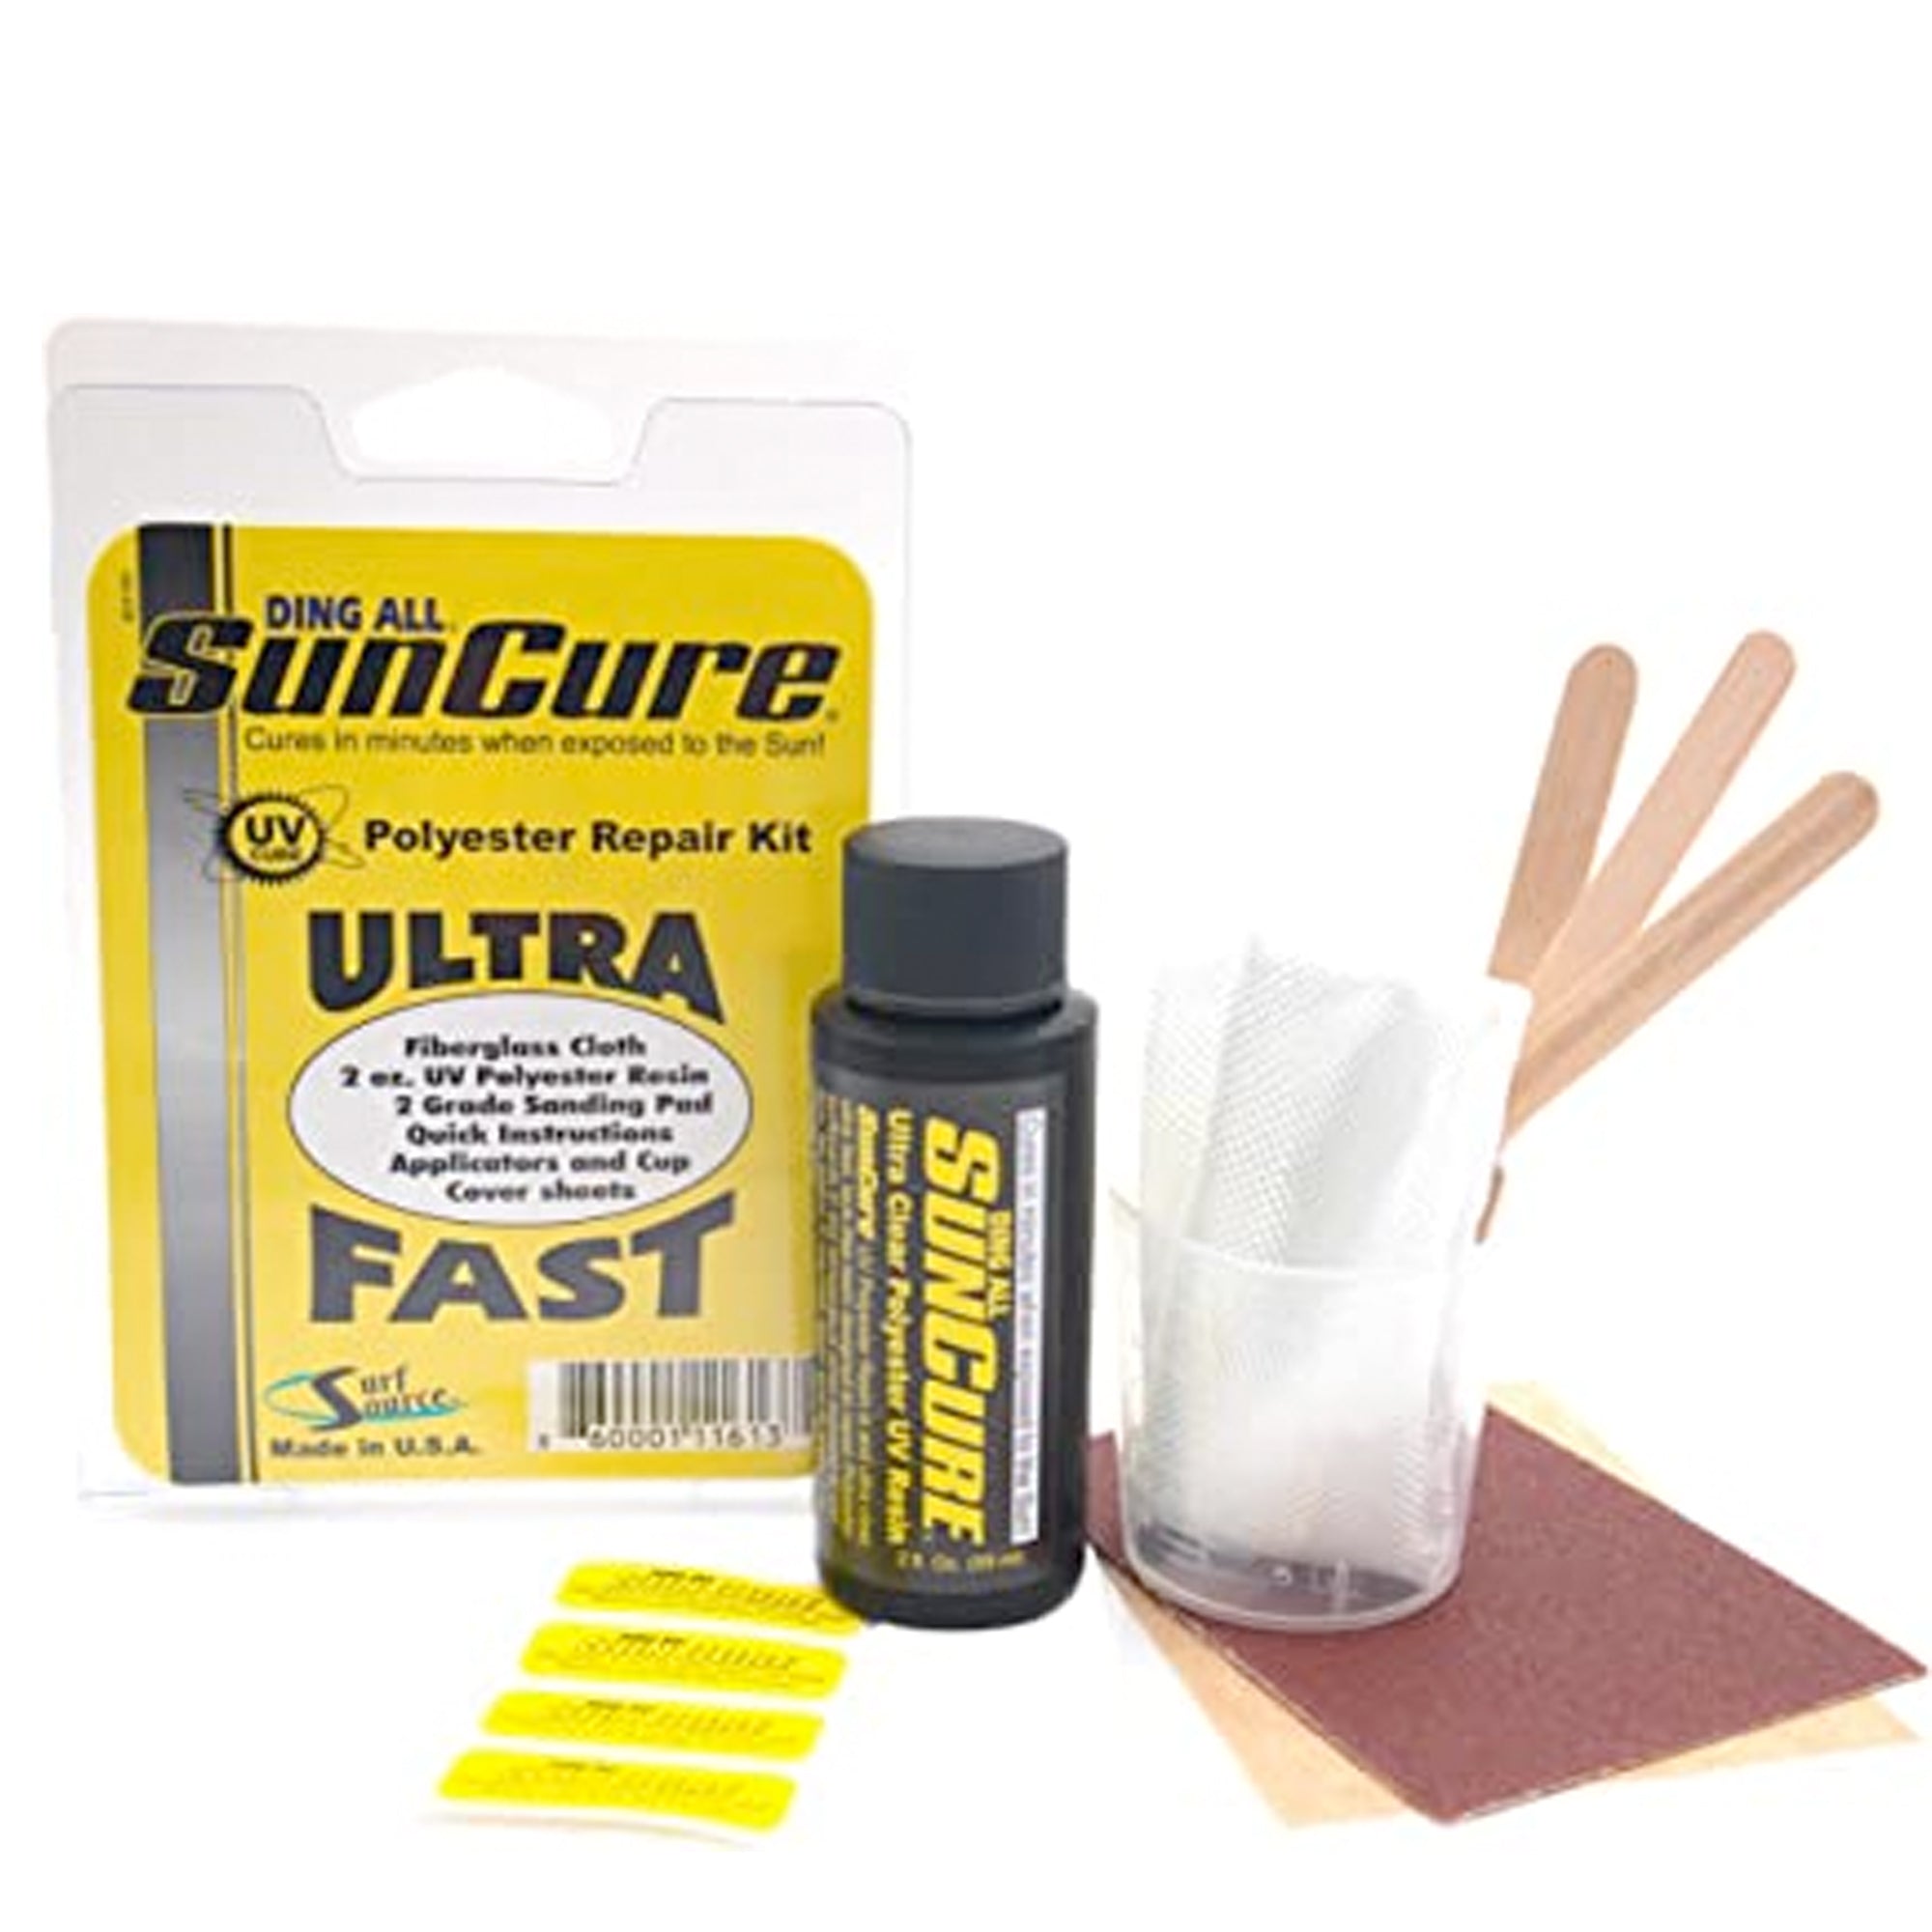 Ding All Sun Cure Ultra Fast Polyester Repair Kit